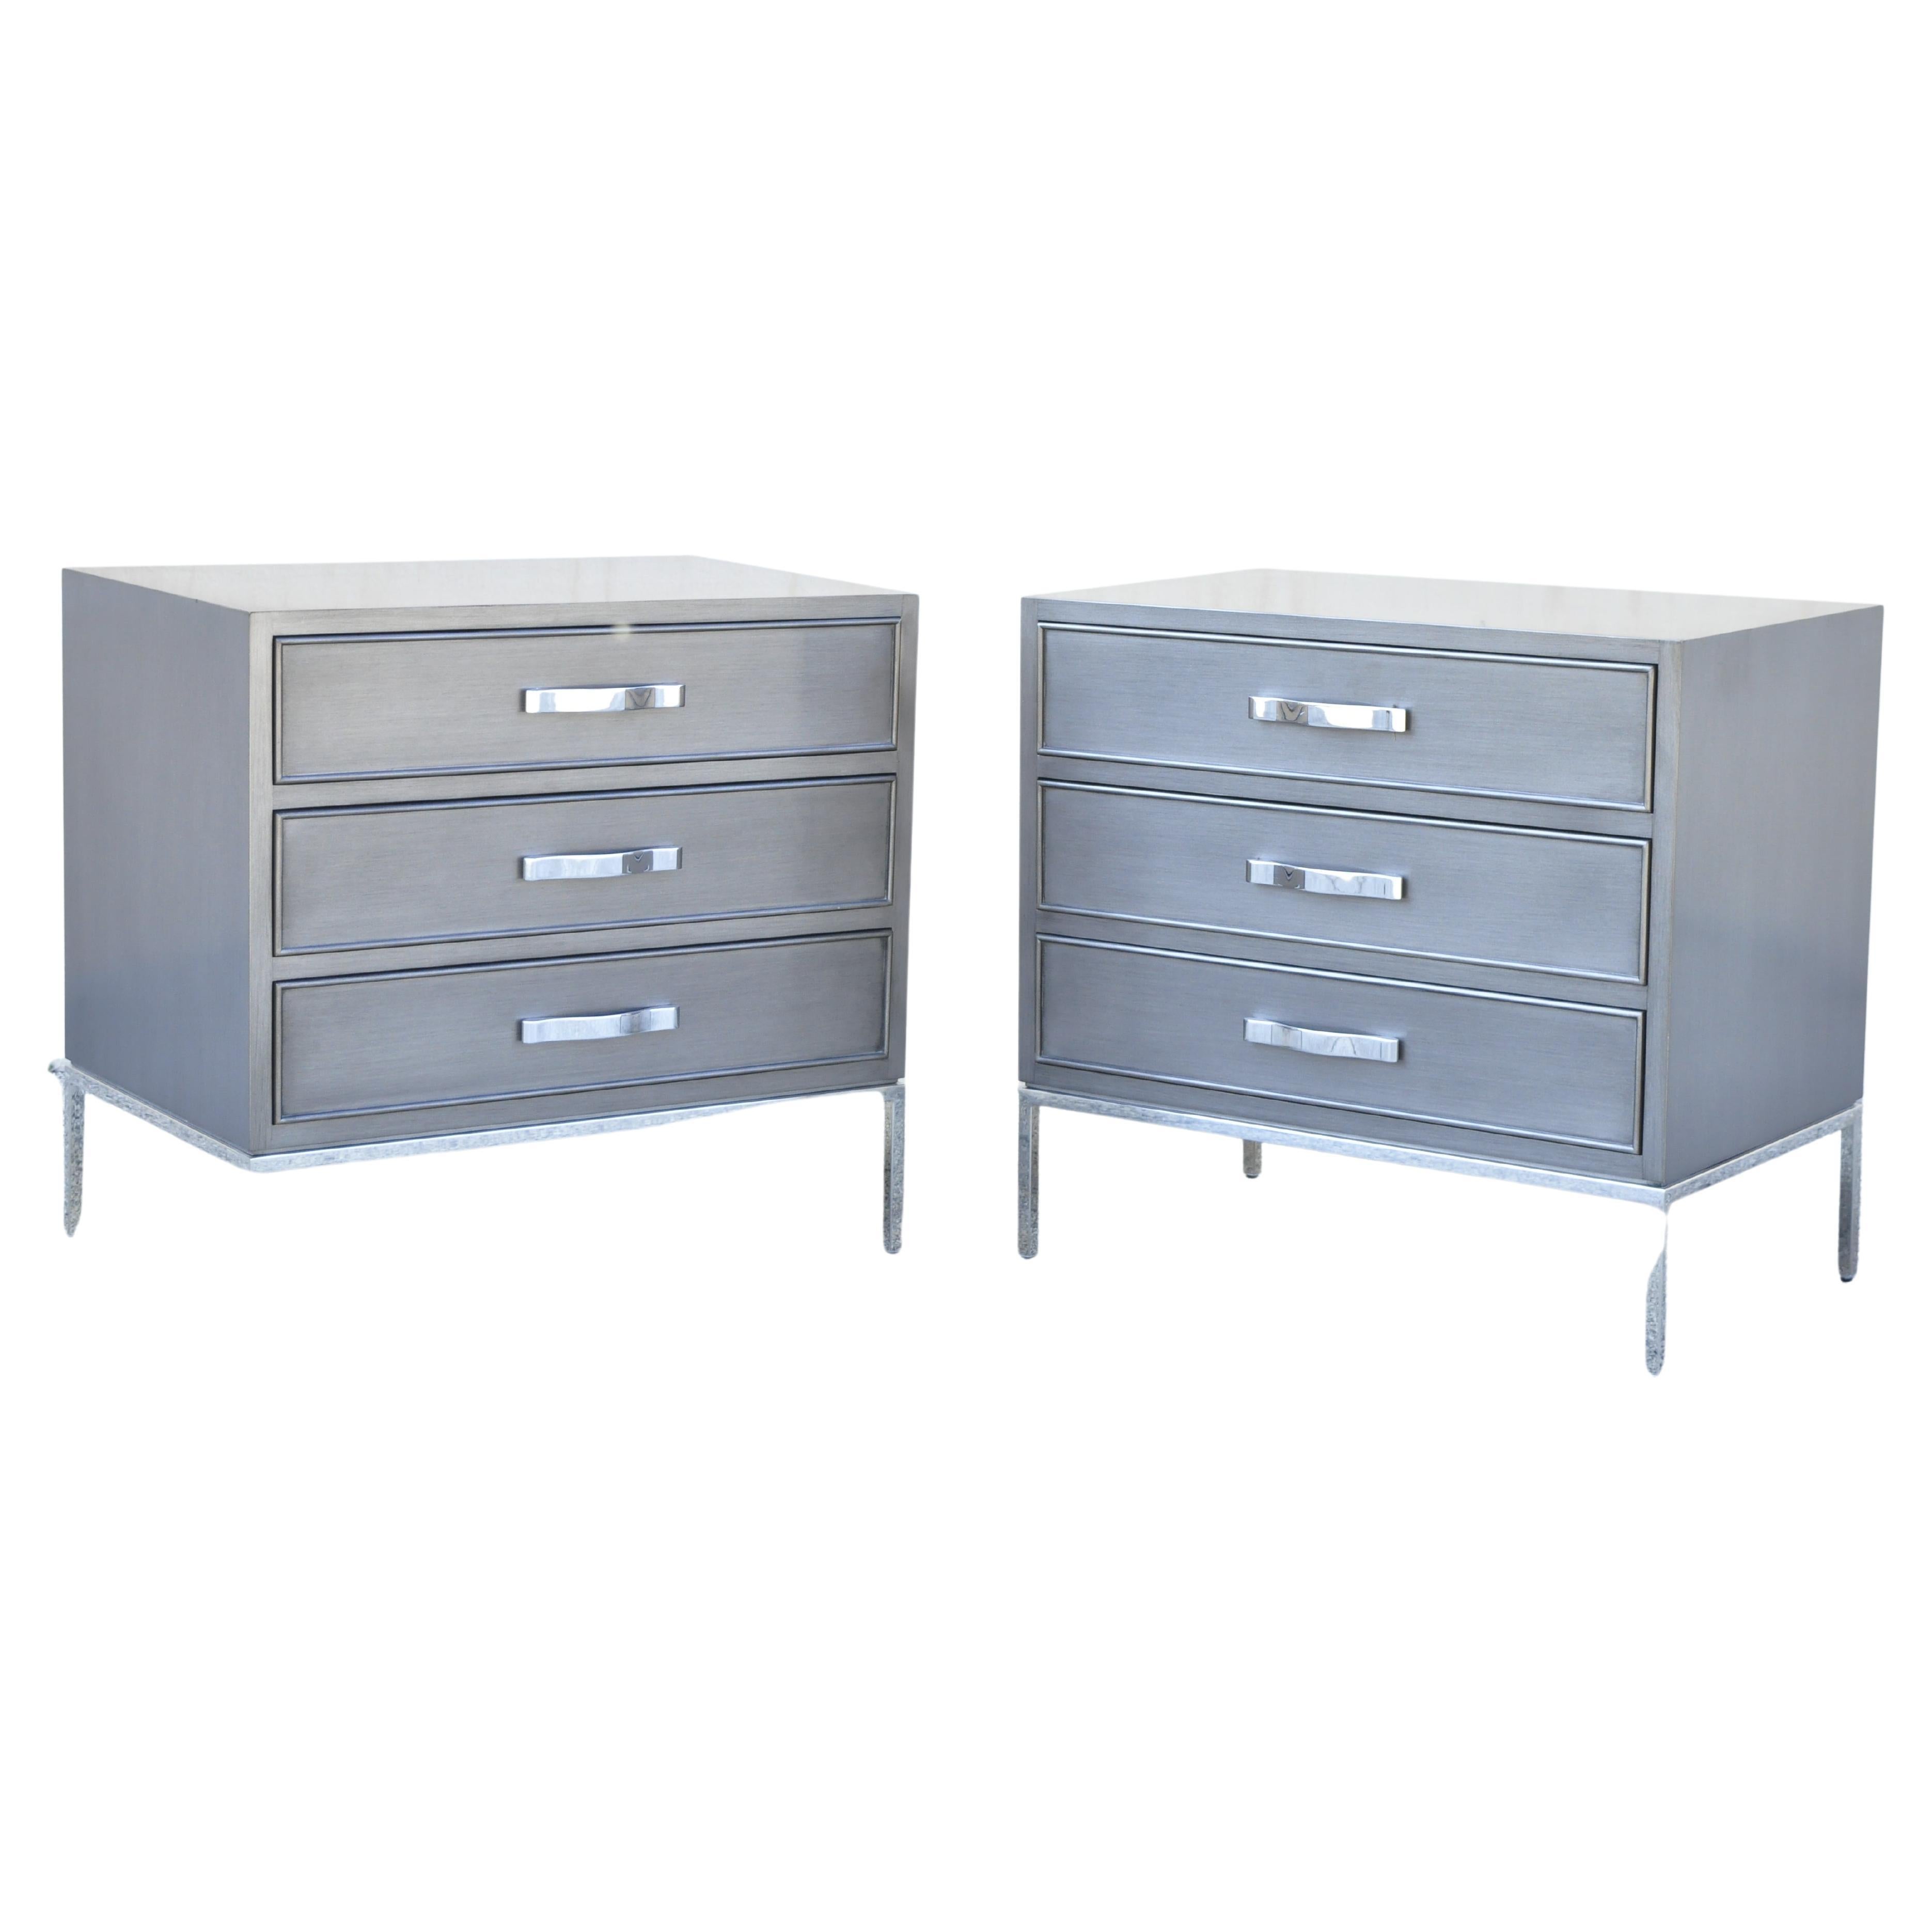 Swaim Furniture Gray Lacquer 3 Drawer Grant Chest Modern Nightstands - a Pair For Sale